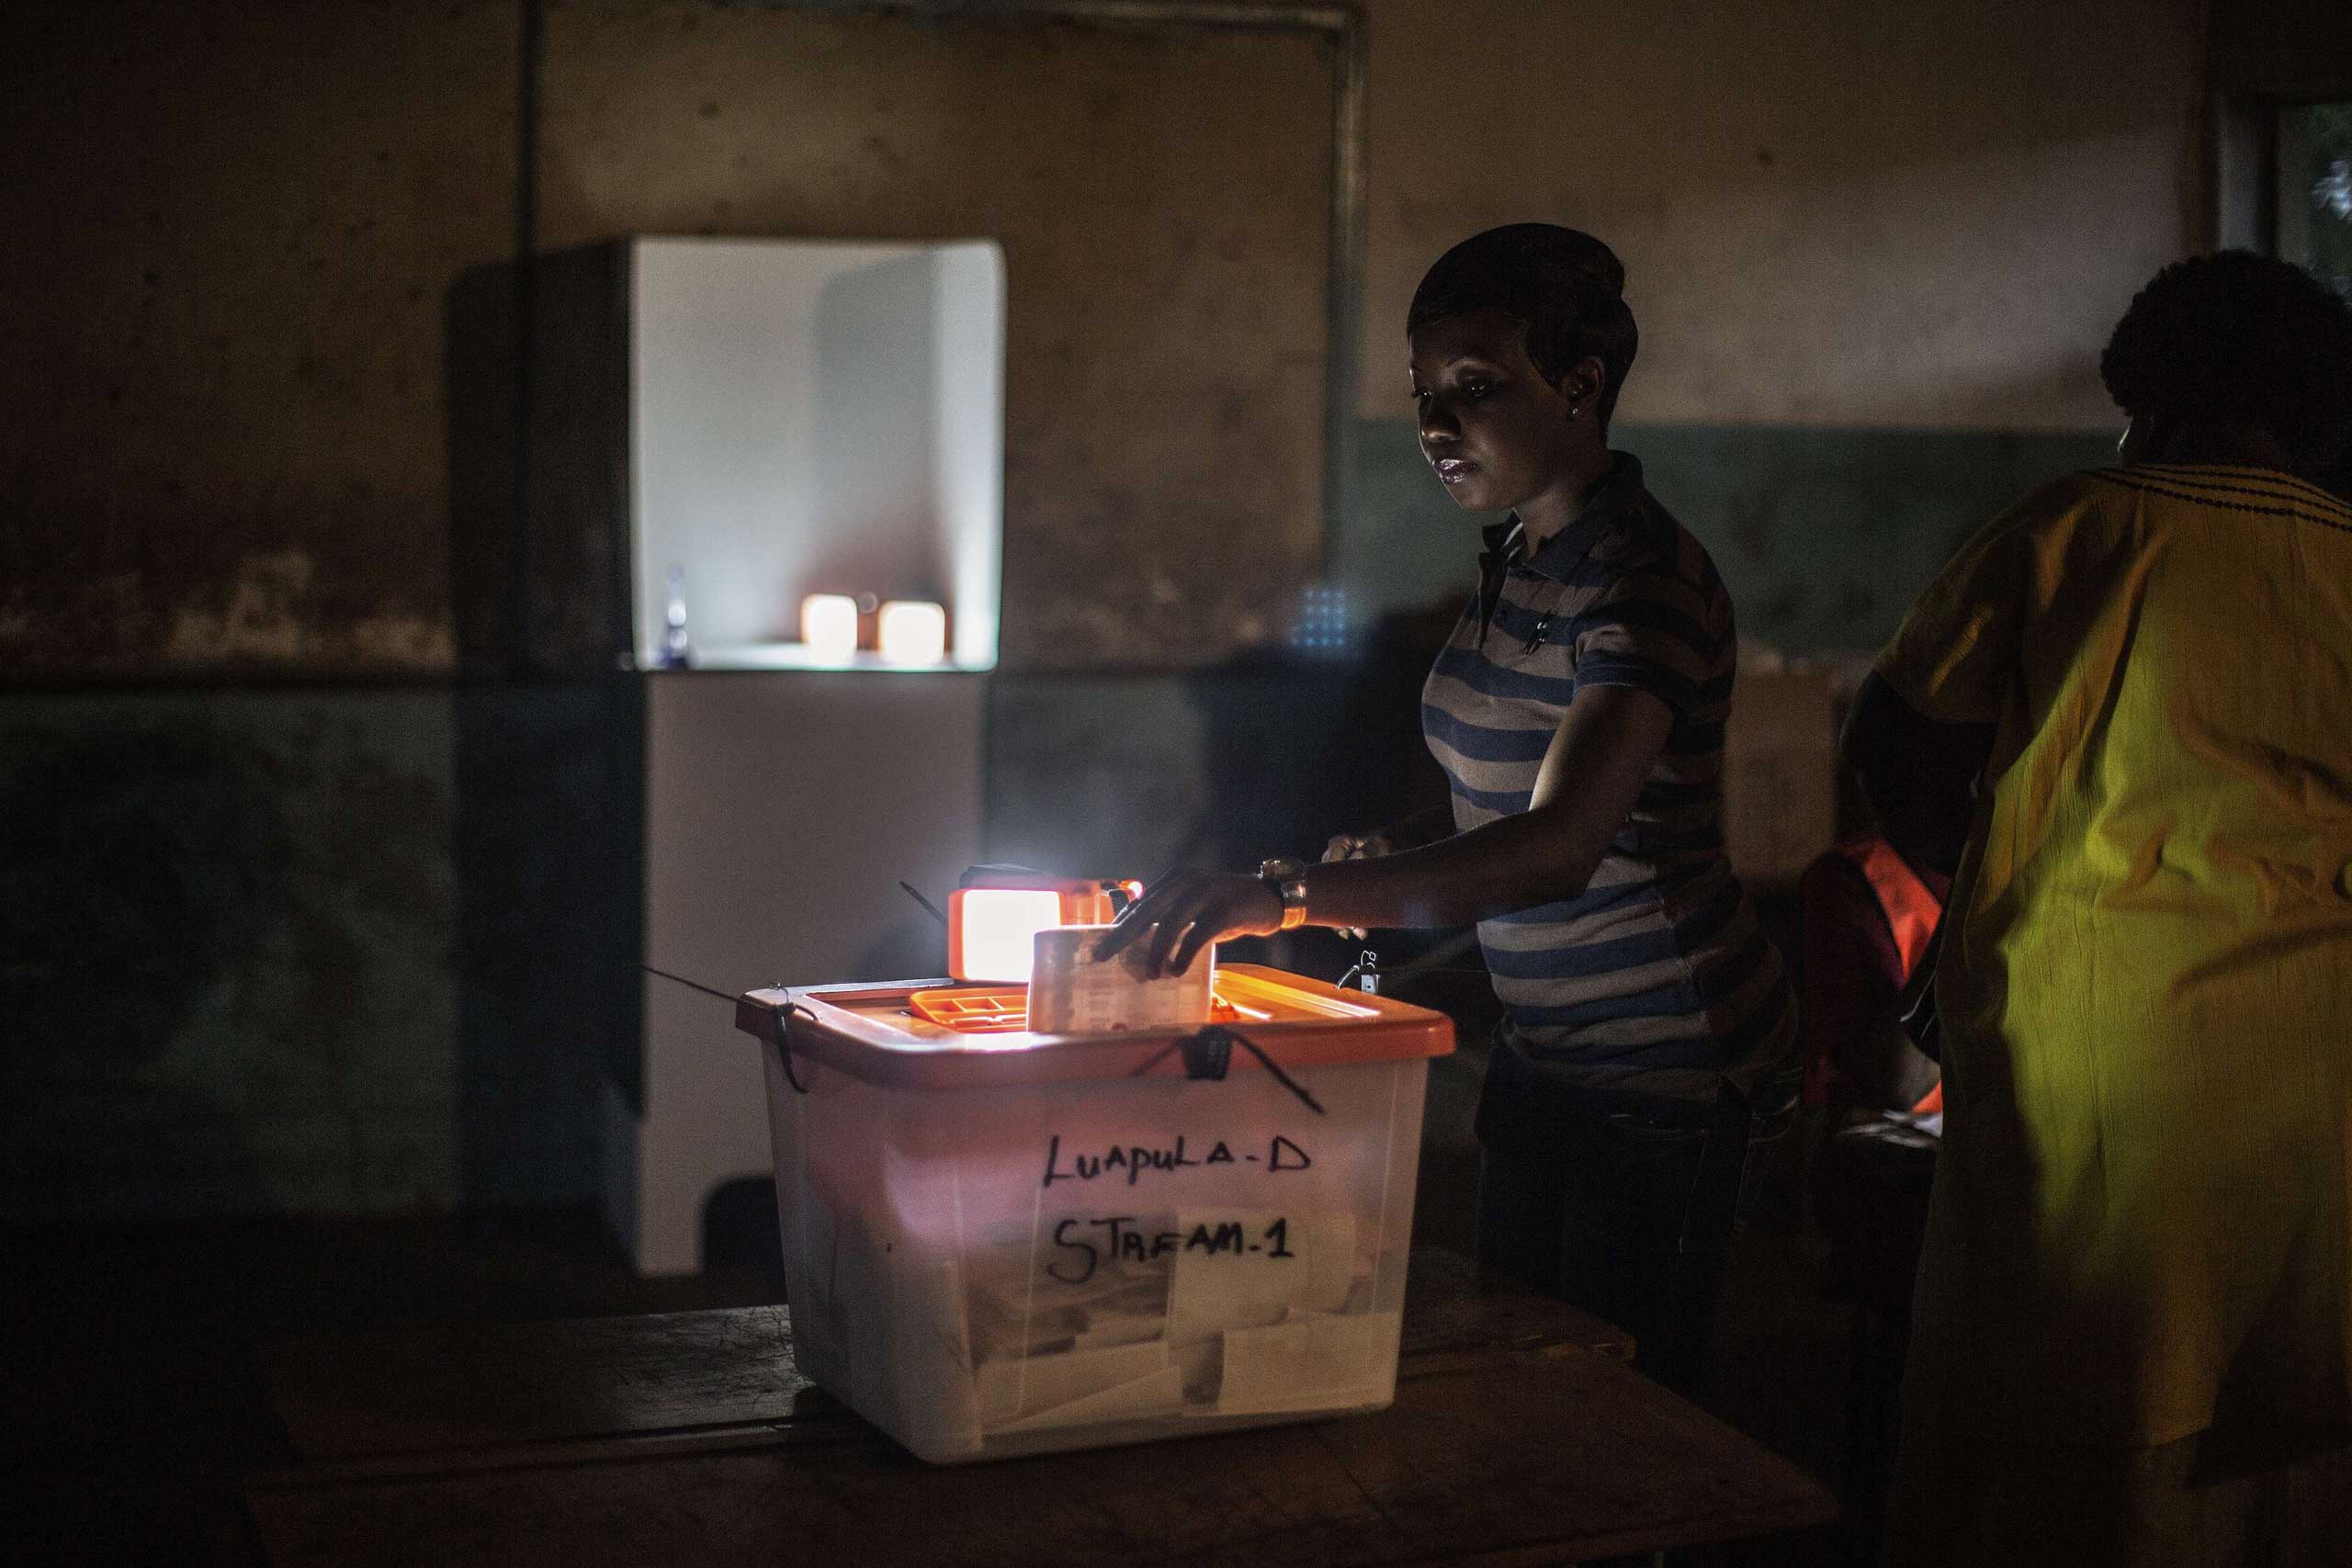 Jan. 20, 2015. A Zambian woman casts her ballot for the presidential elections at a voting station in Lusaka, Zambia. One of the frontrunners in Zambia's presidential election cried fraud just hours after polling stations opened in a tight race to replace Michael Sata, who died in office last year.